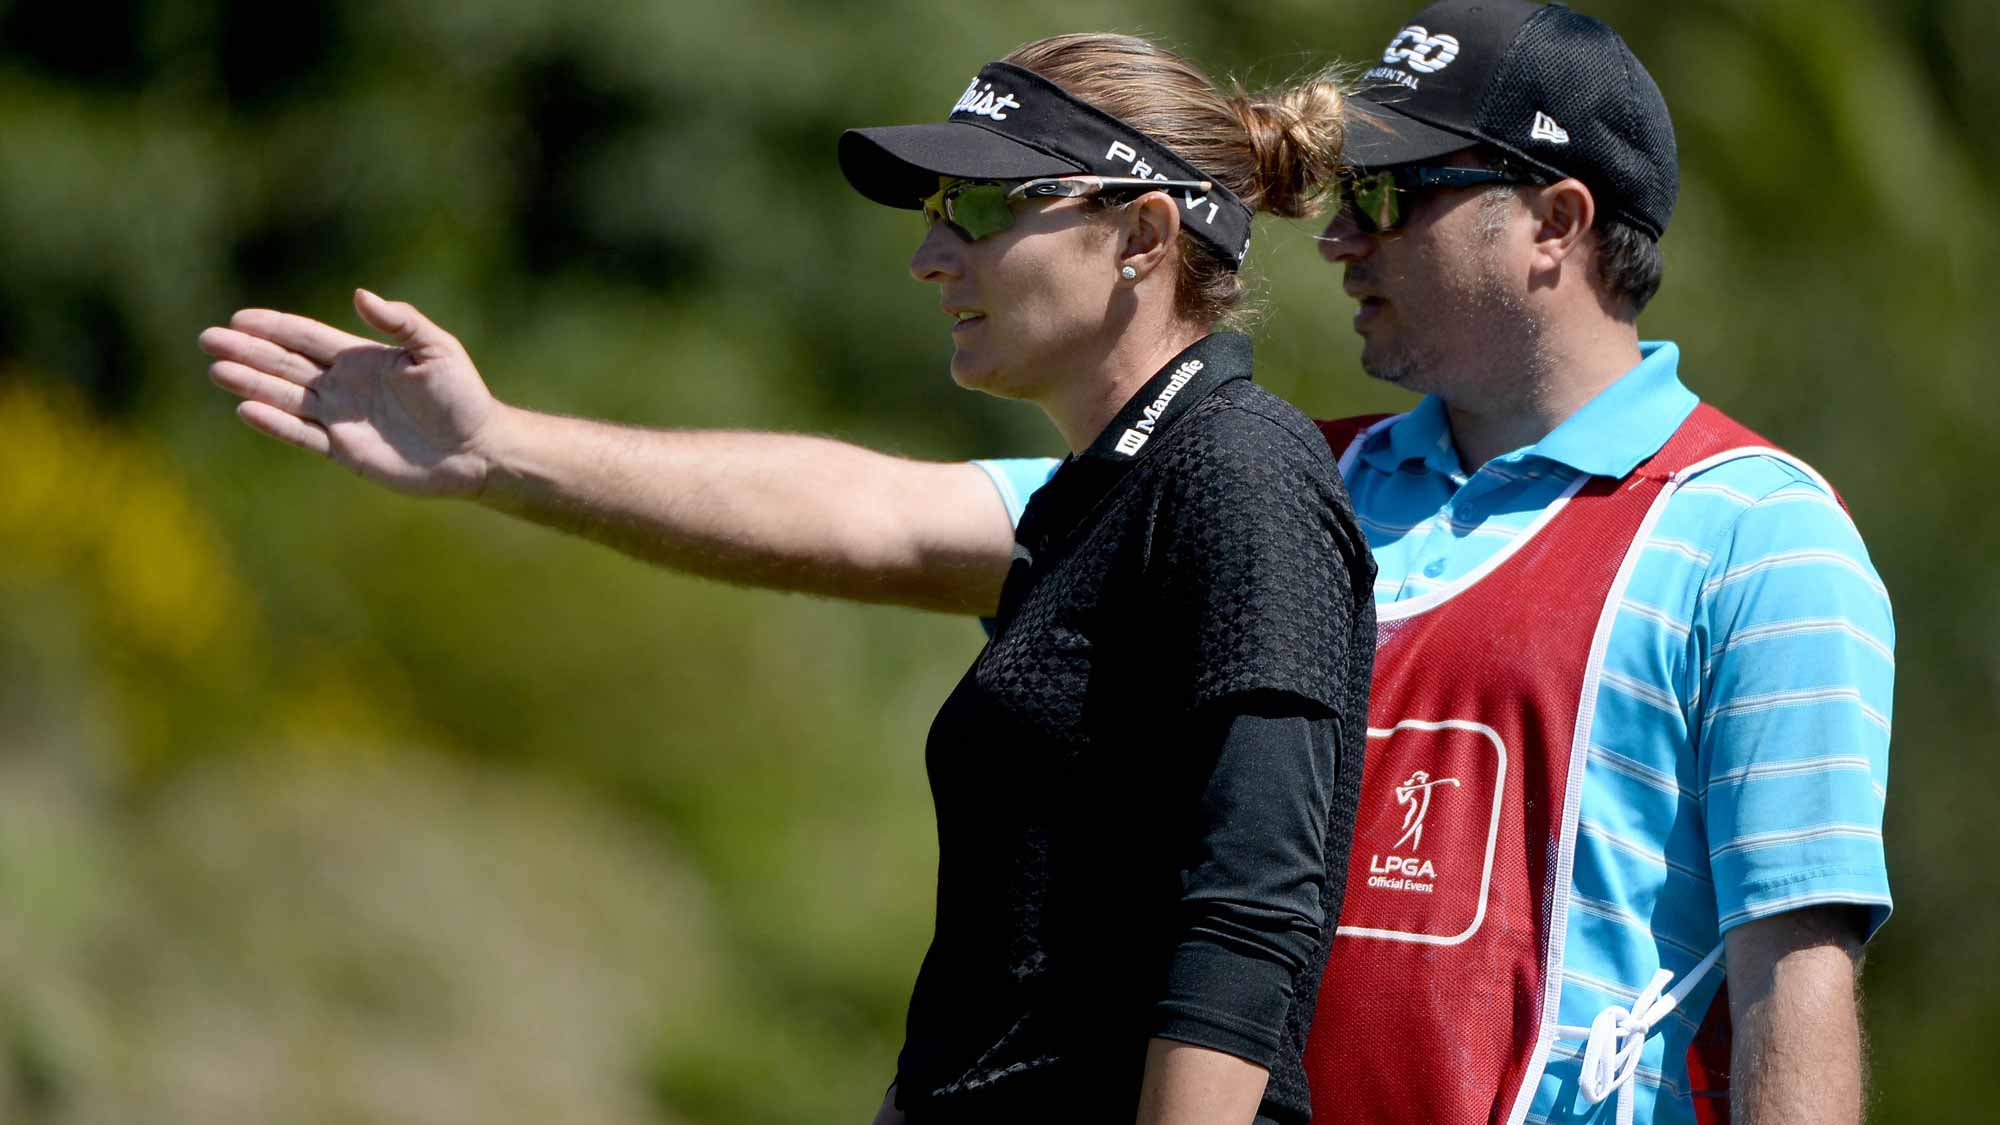 Brittany Lang lines up putt on the 18th hole with caddie during Round One of the KIA Classic 